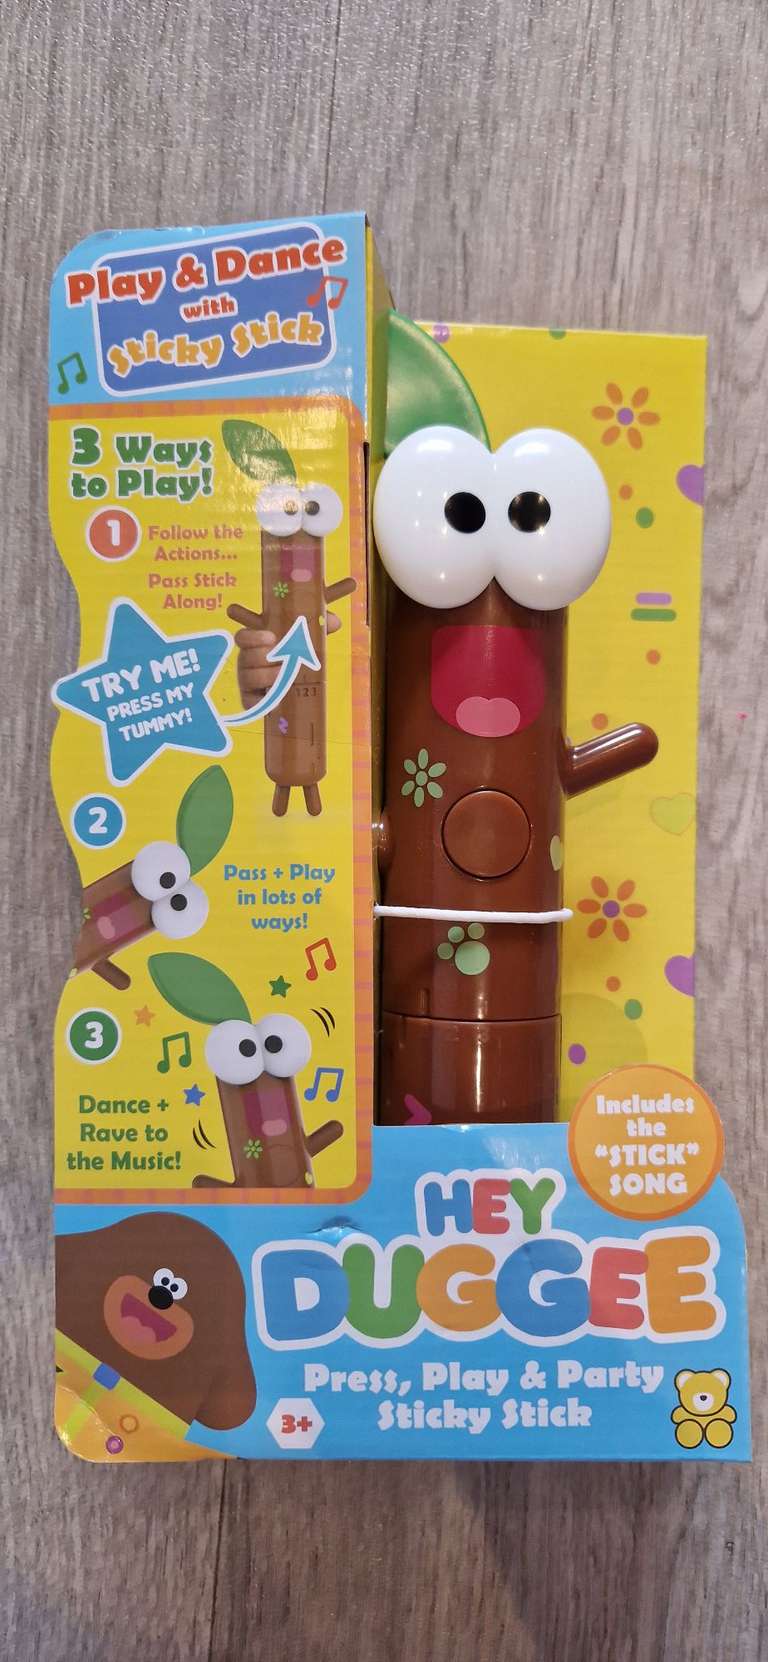 Hey Duggee Press play and party sticky stick - Worcester